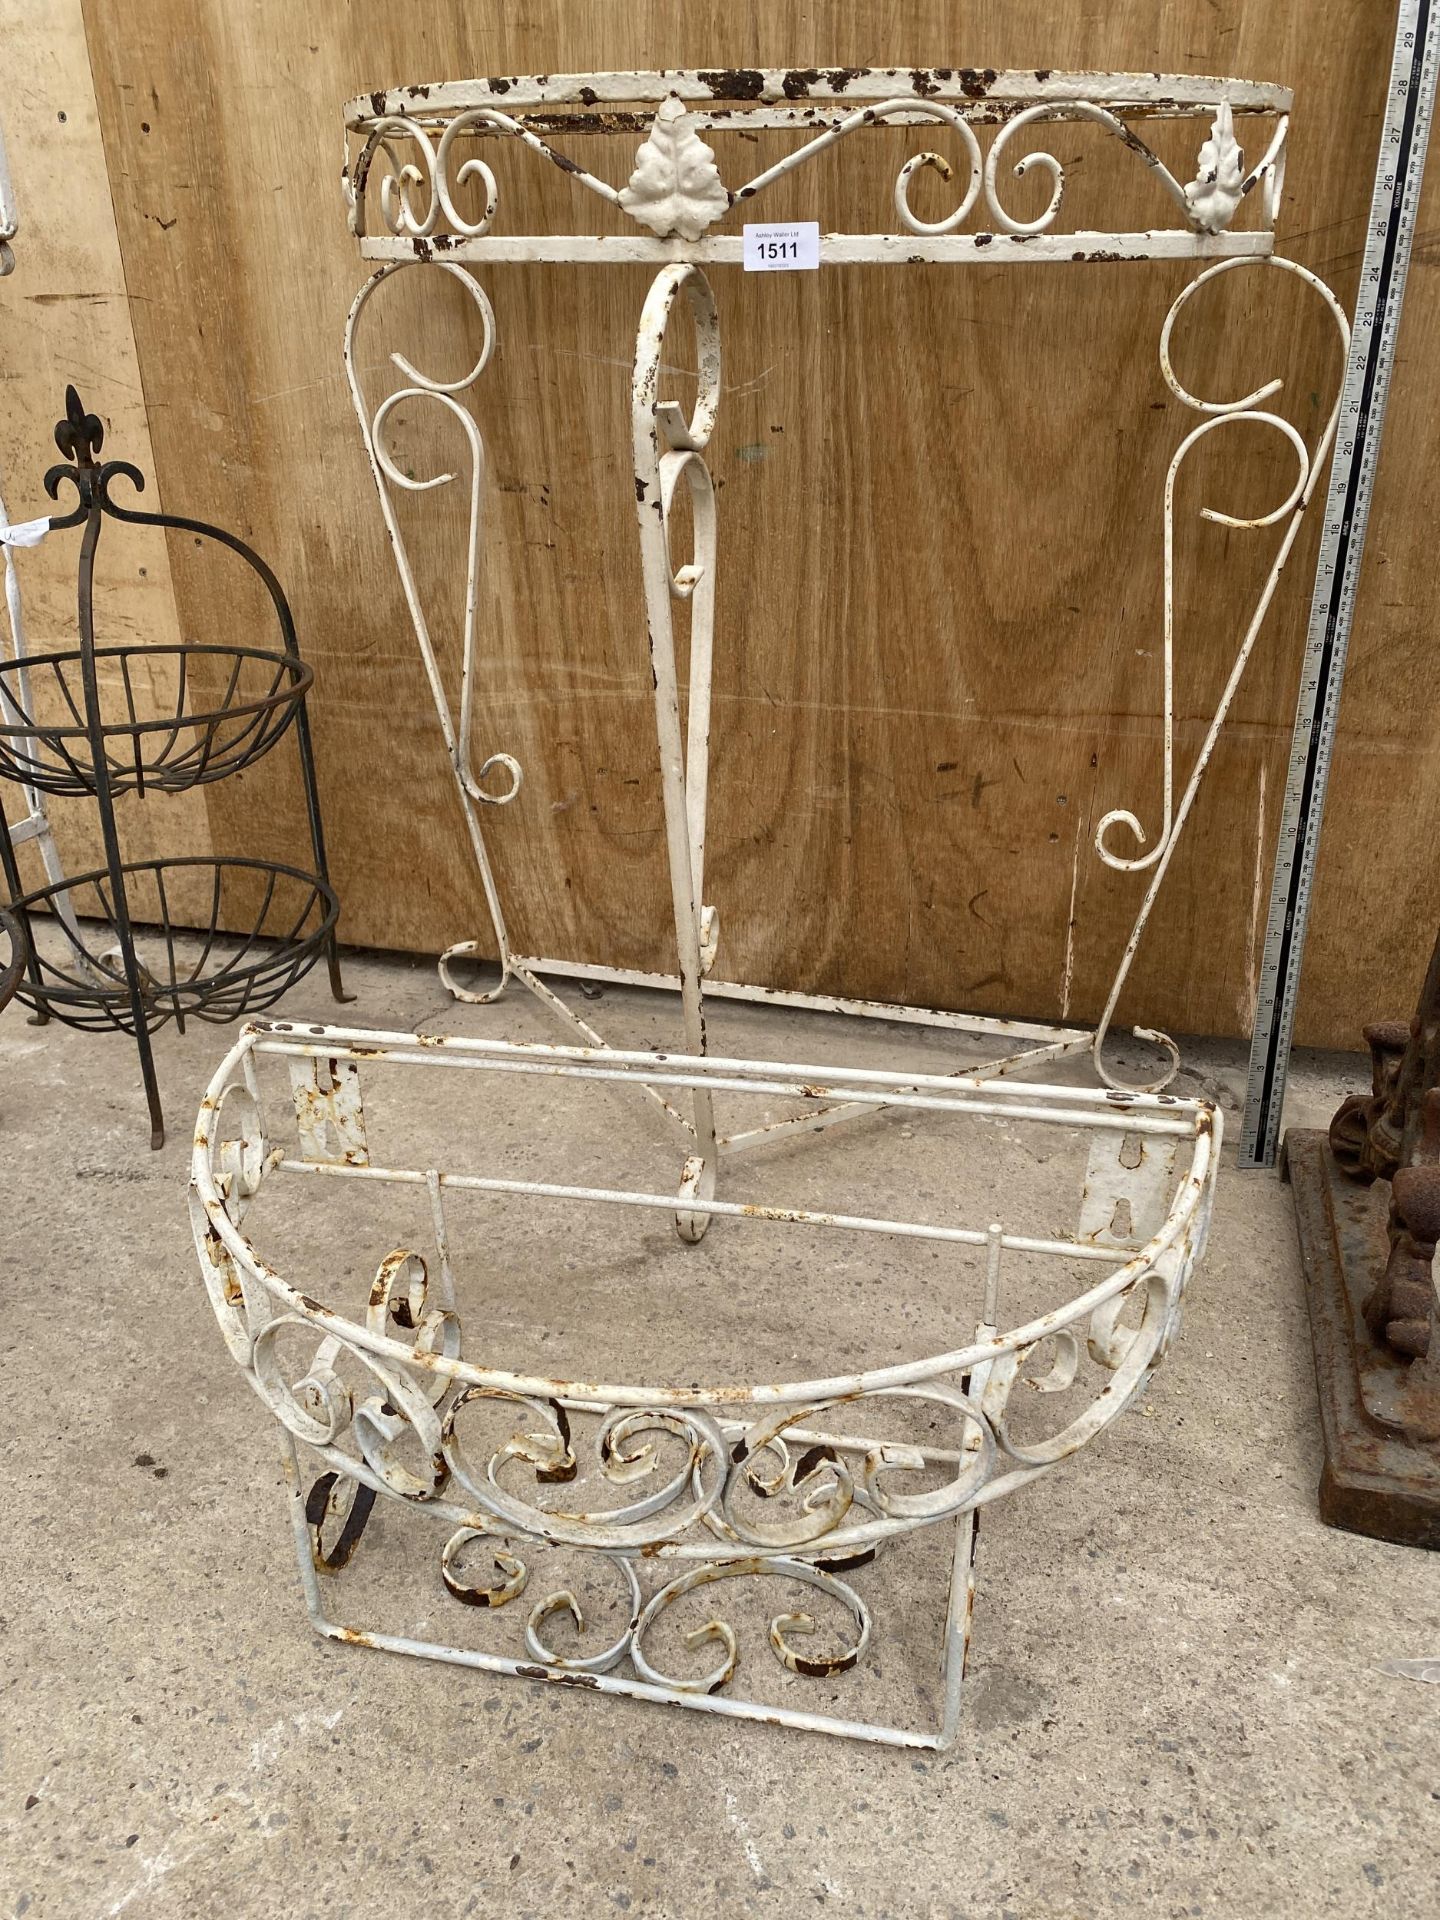 A WROUGHT IRON HALF MOON TABLE BASE AND A WINDOW BOX PLANT HOLDER - Image 2 of 3